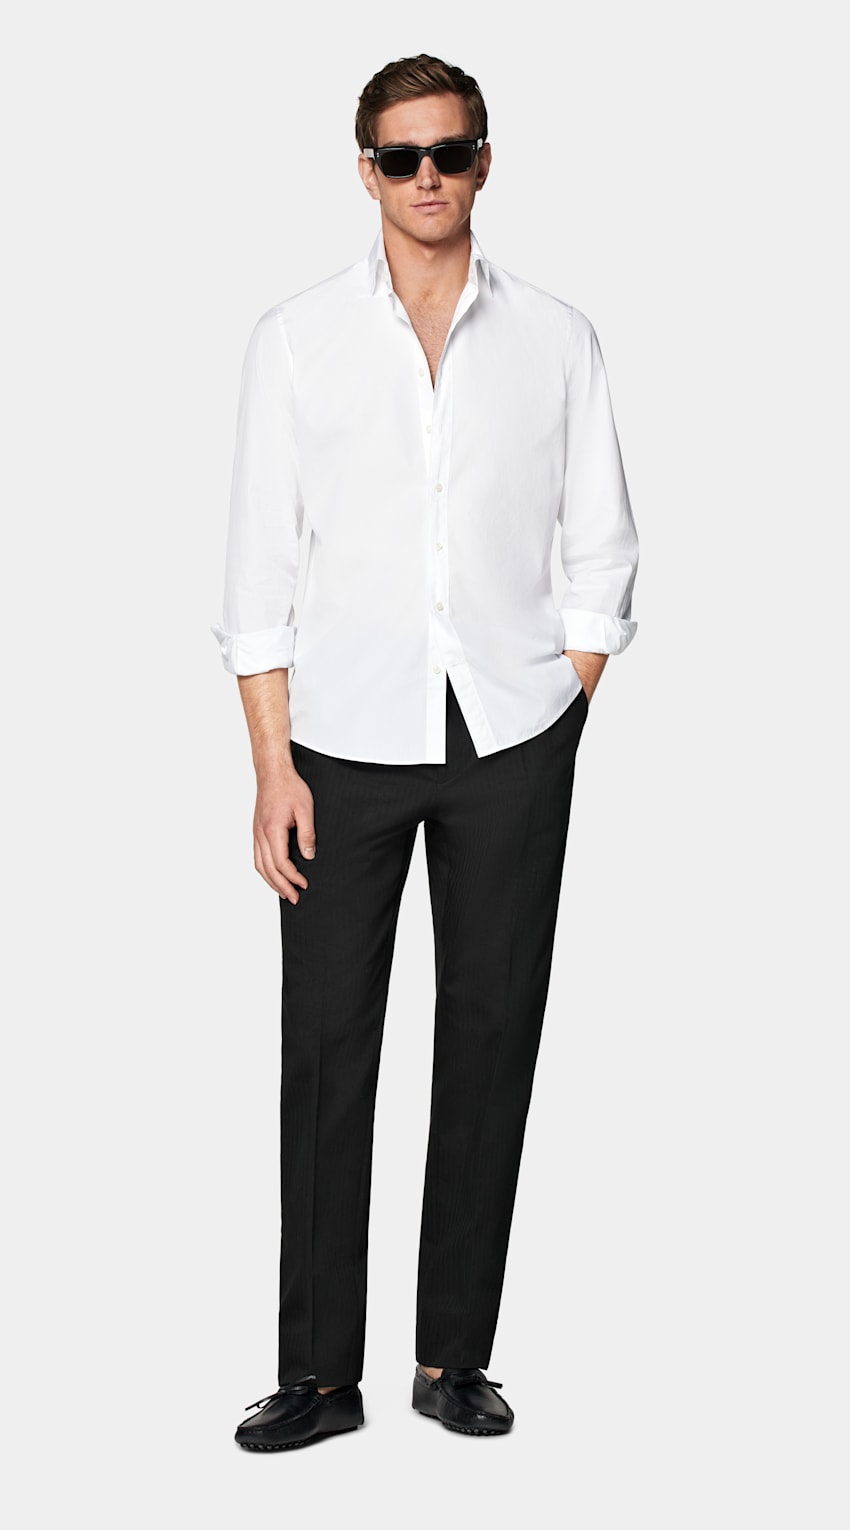 SUITSUPPLY Egyptian Cotton by Testa Spa, Italy White Poplin Slim Fit Shirt